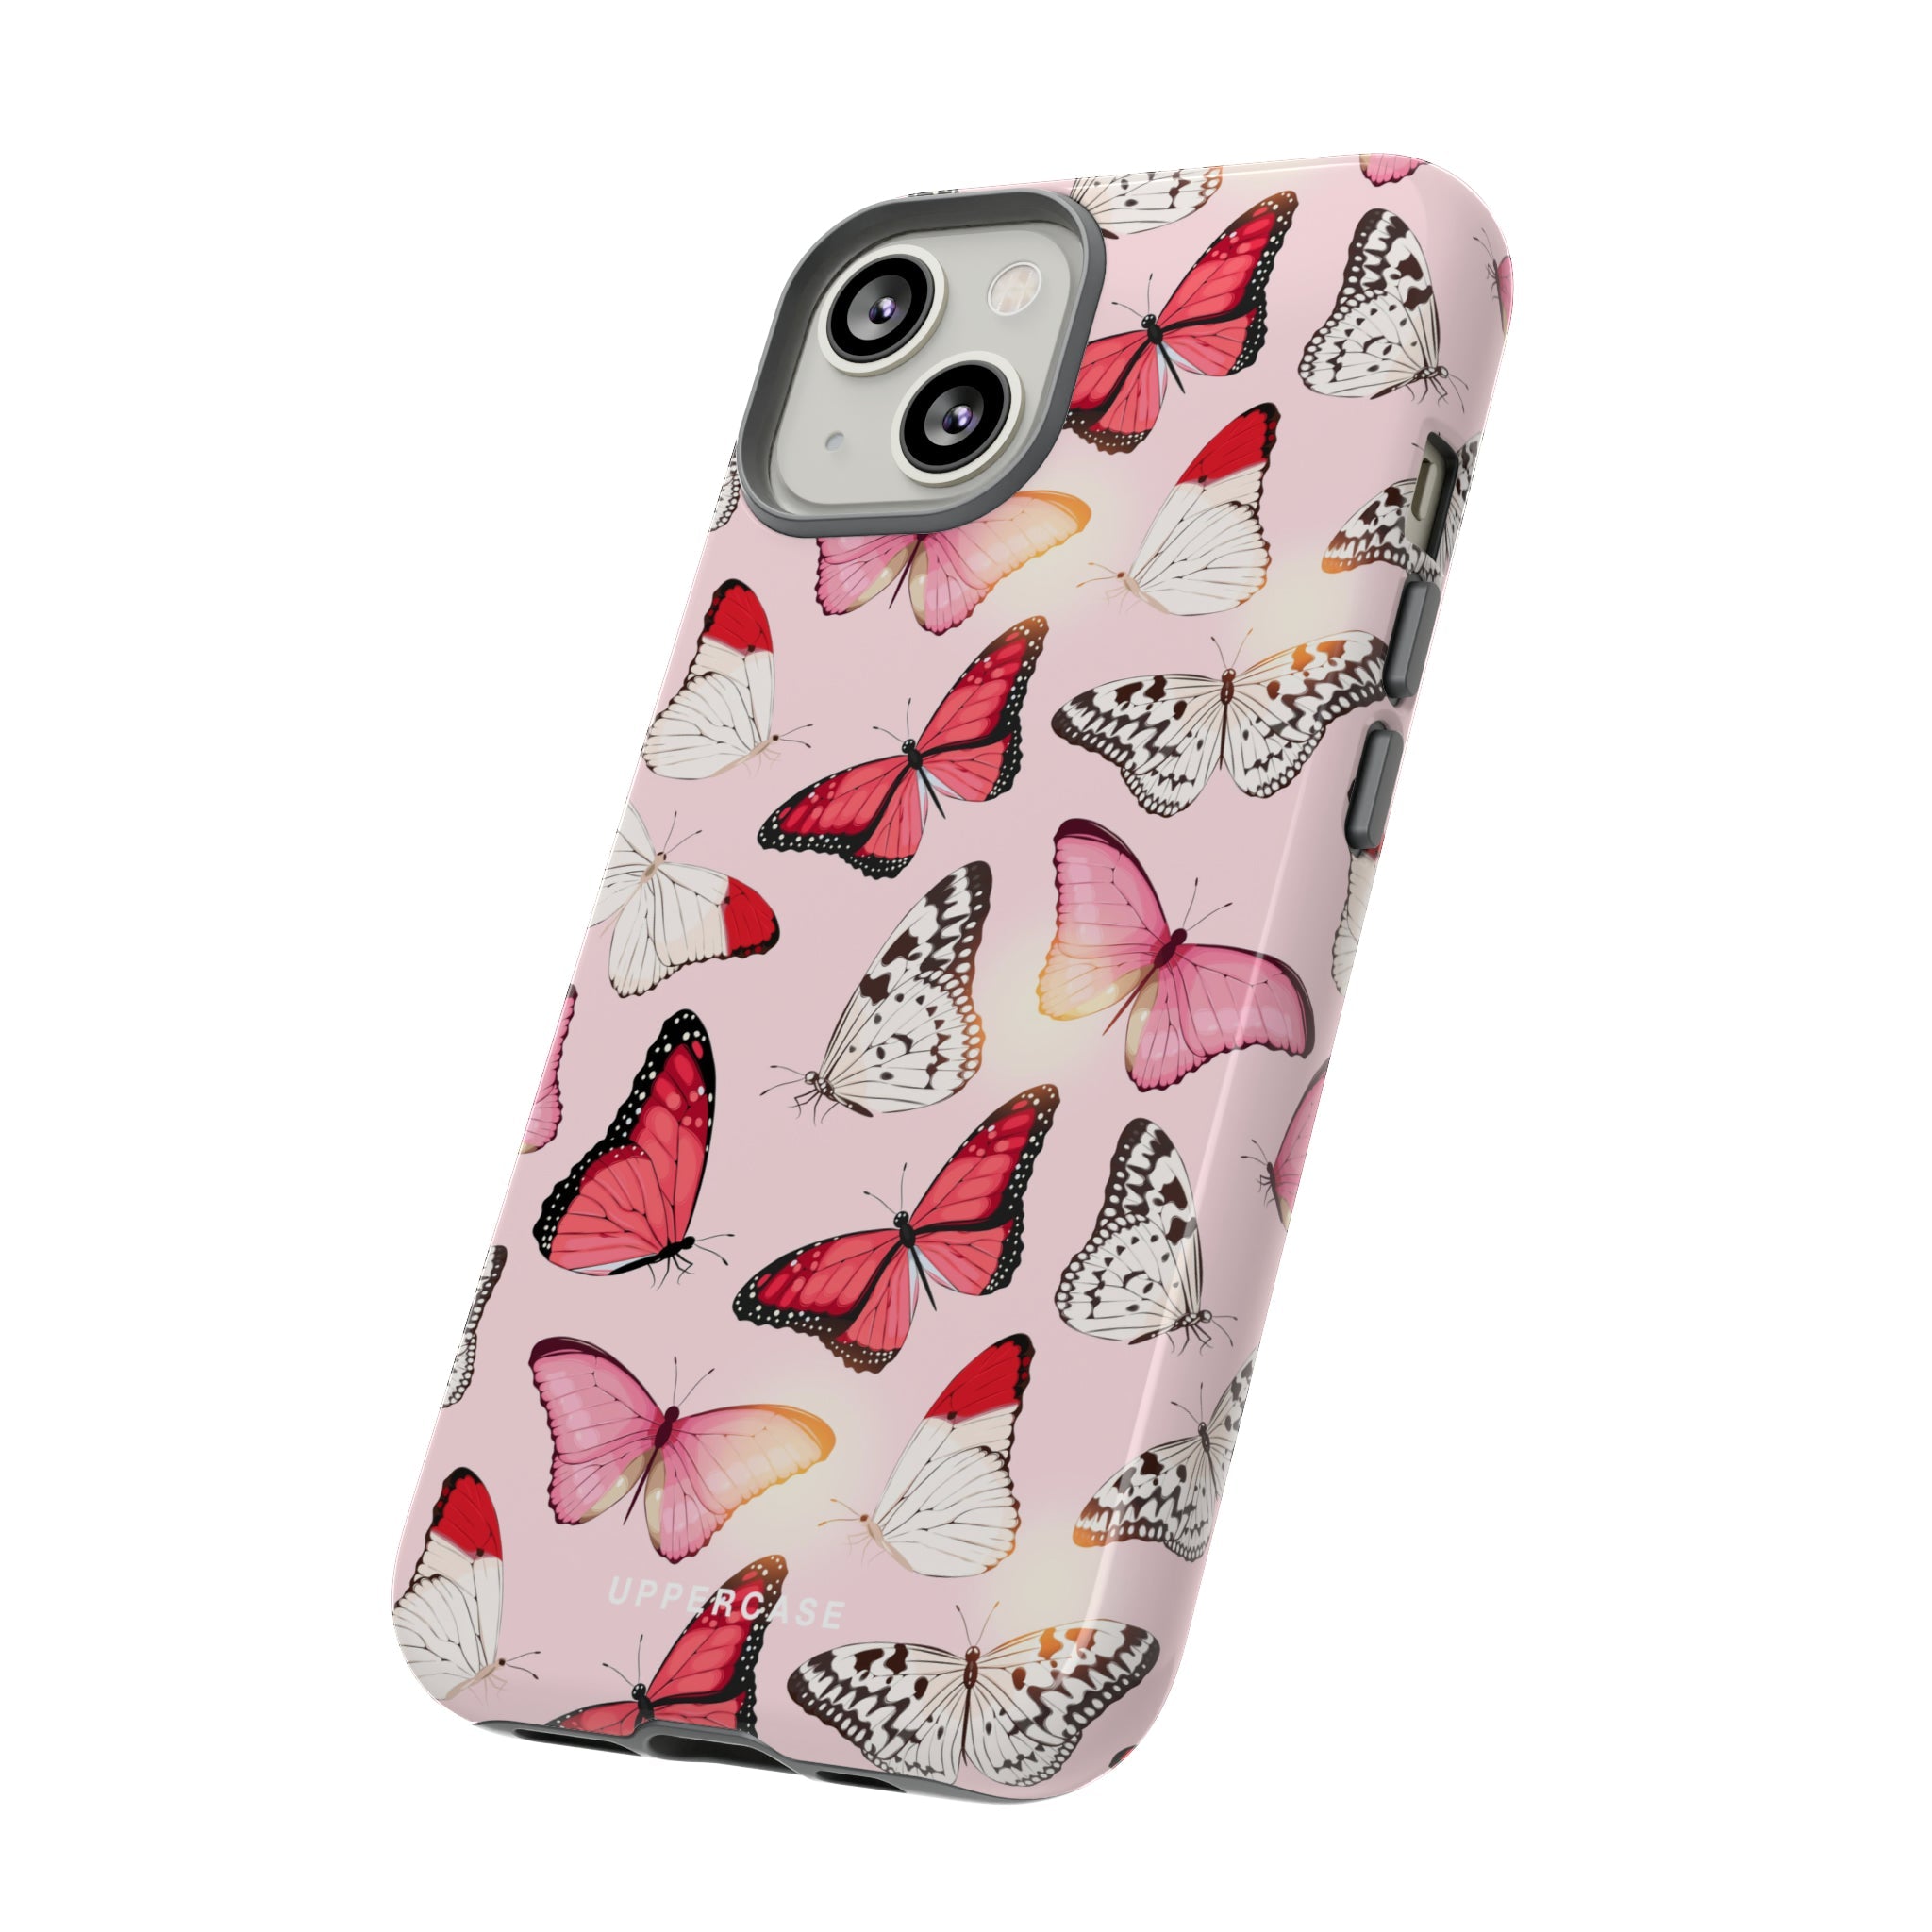 Tinkerbelle - Personalised Strong Case